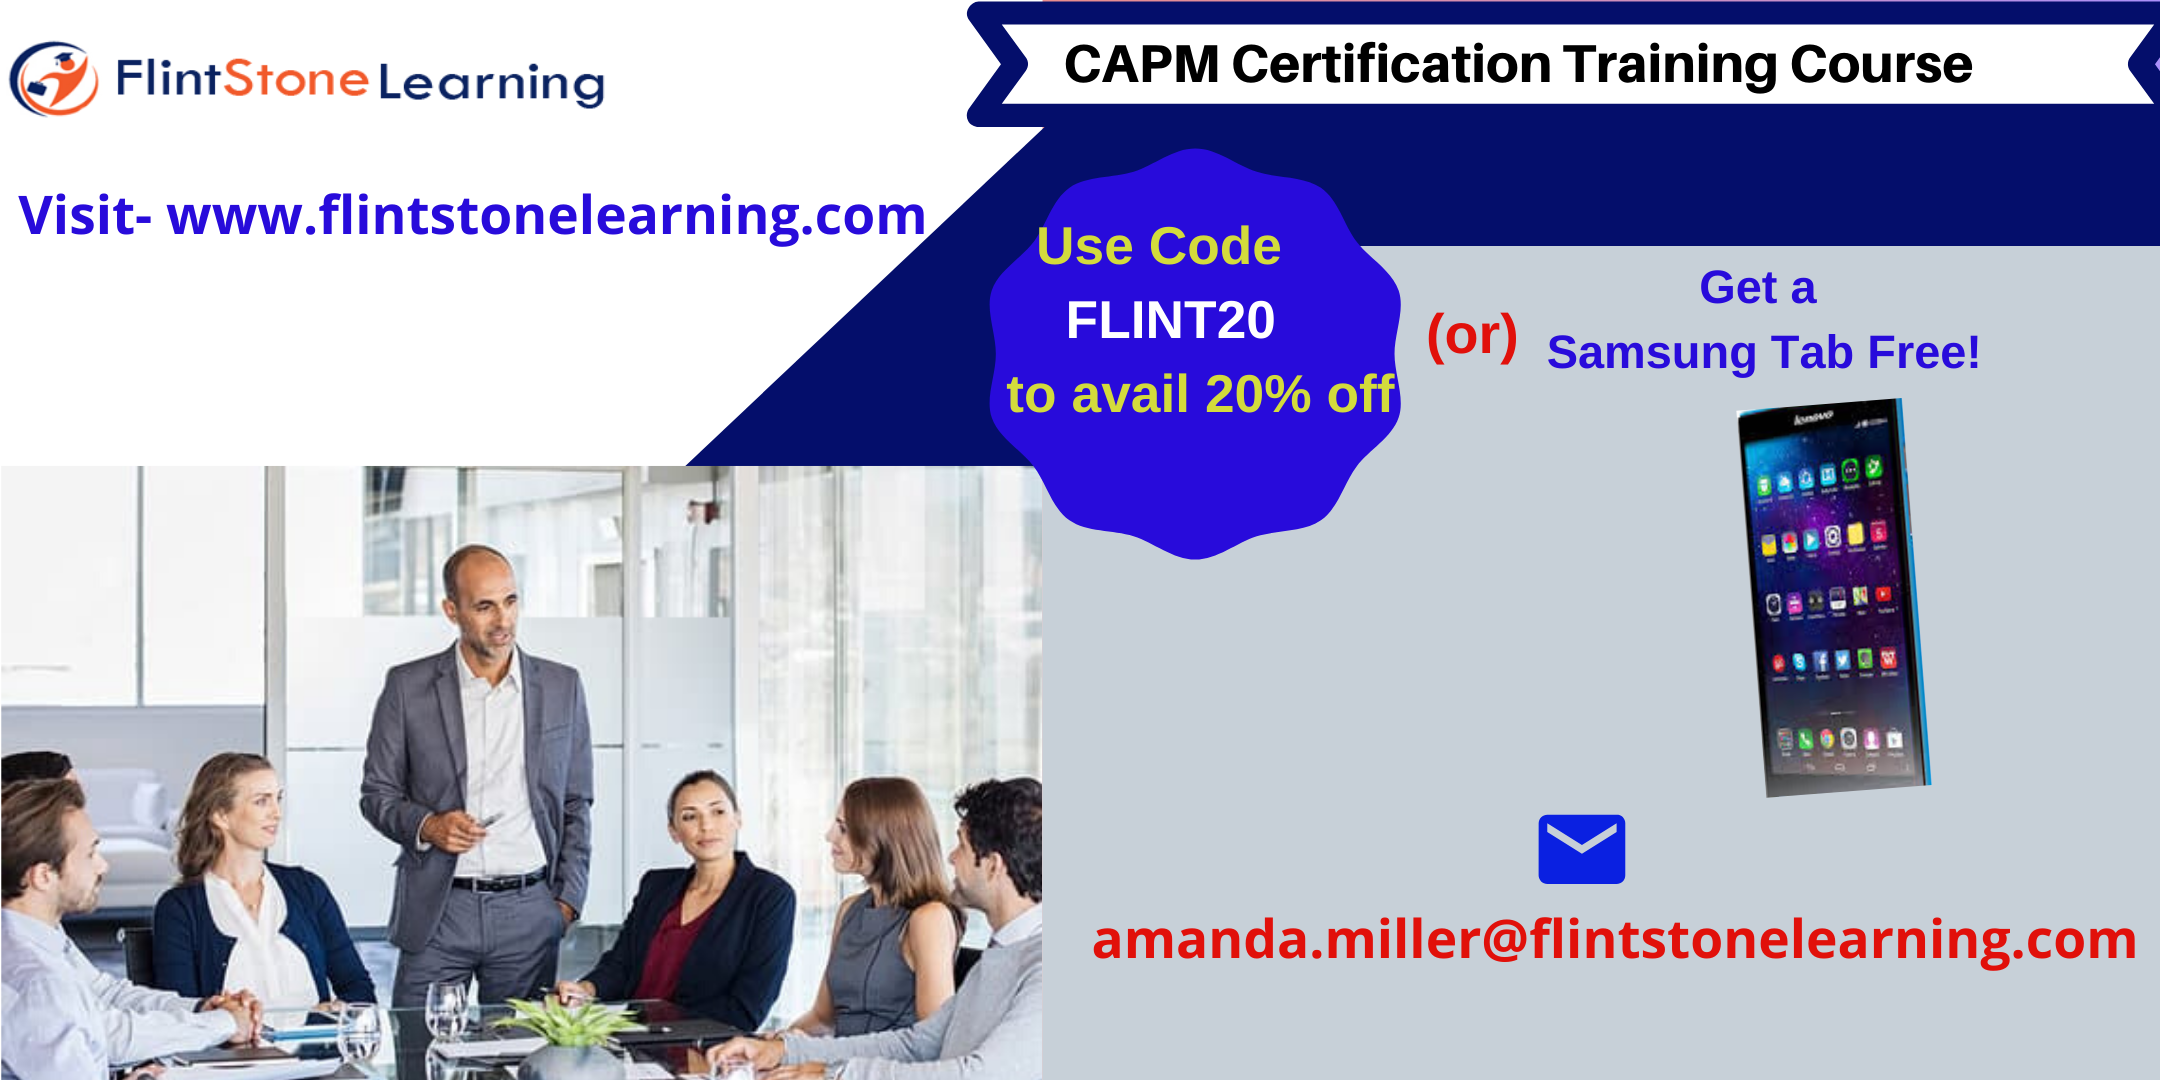 CAPM Certification Training Course in Irwindale, CA